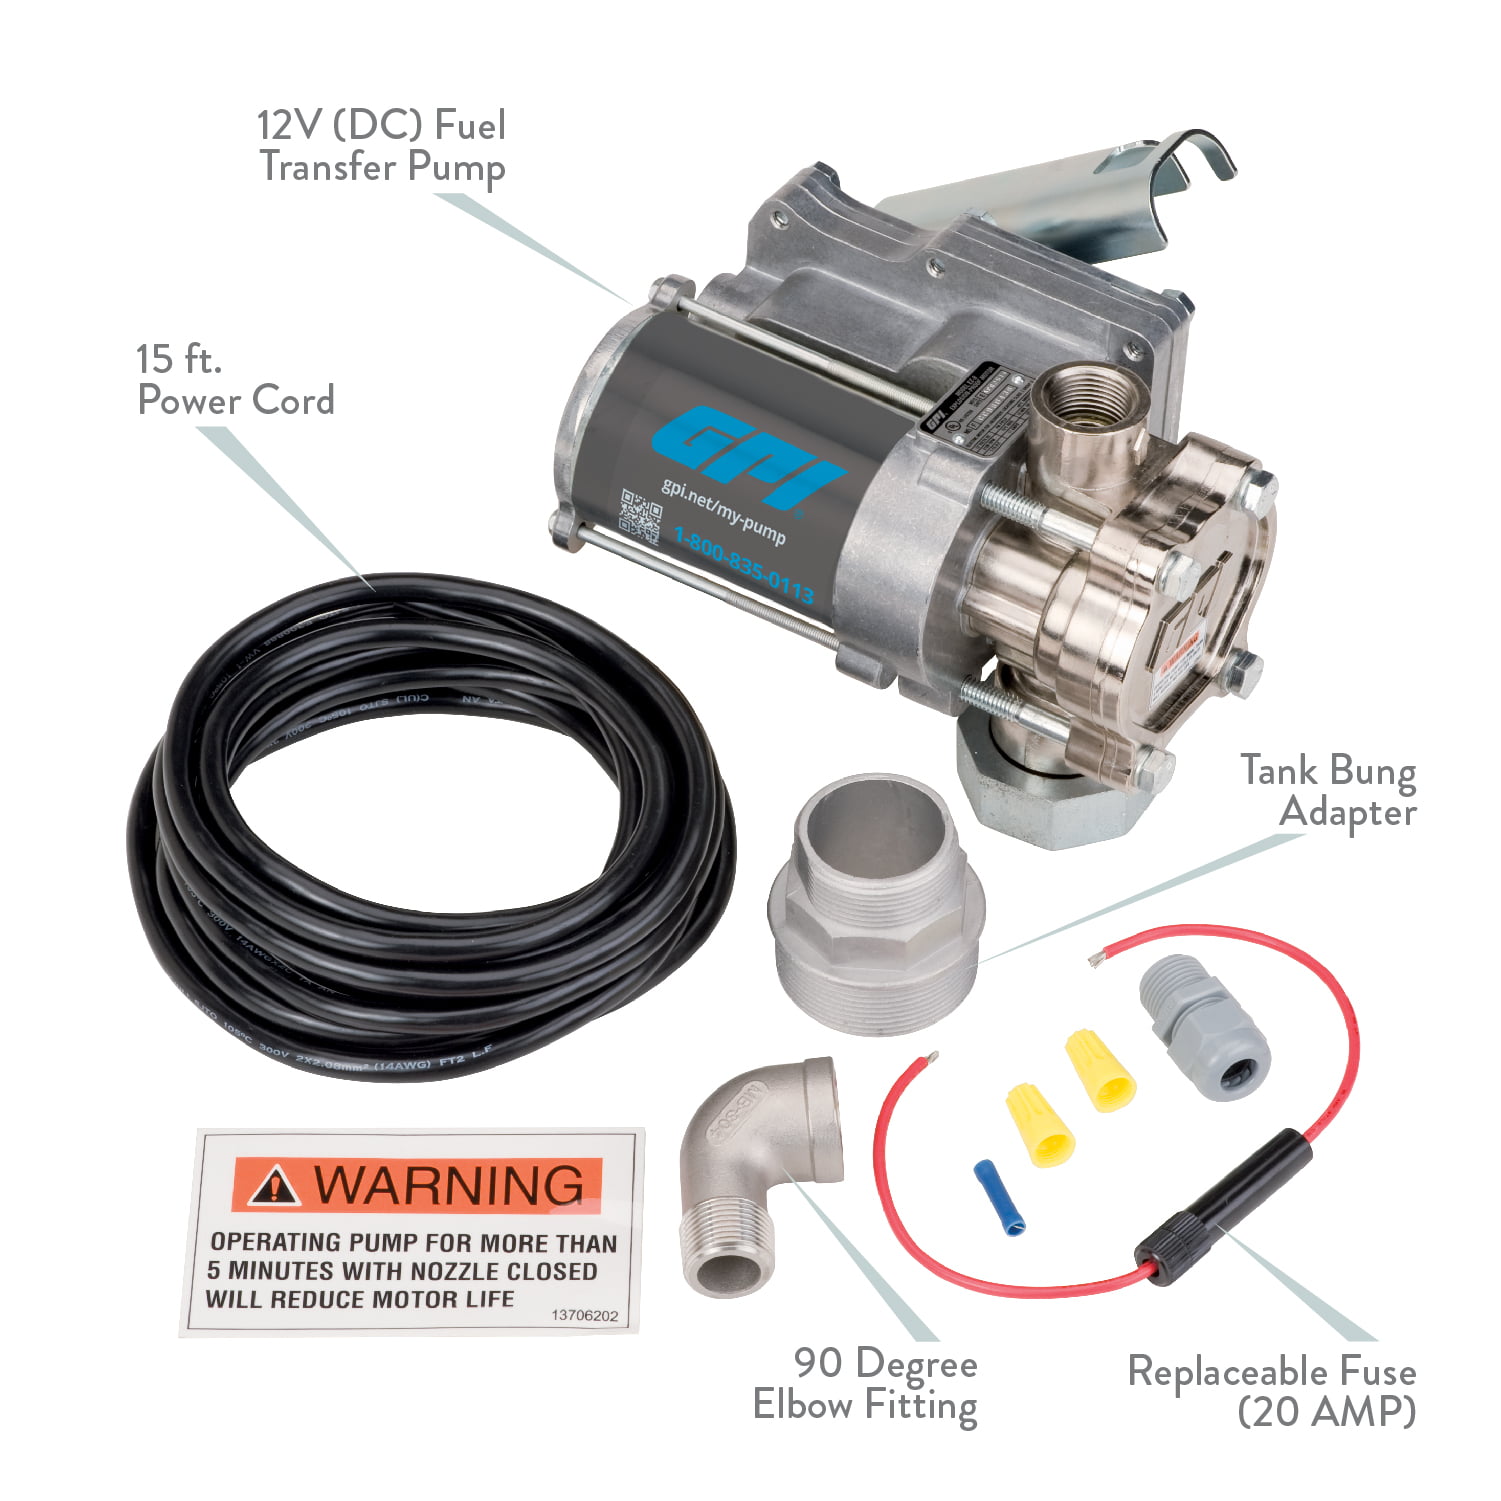 GPI - EZ-8 12v Fuel Transfer Pump (137100-05), Manual Shut-off Nozzle, 10'  Hose, Power Cord, Adjustable Suction Pipe, Spin Collar 